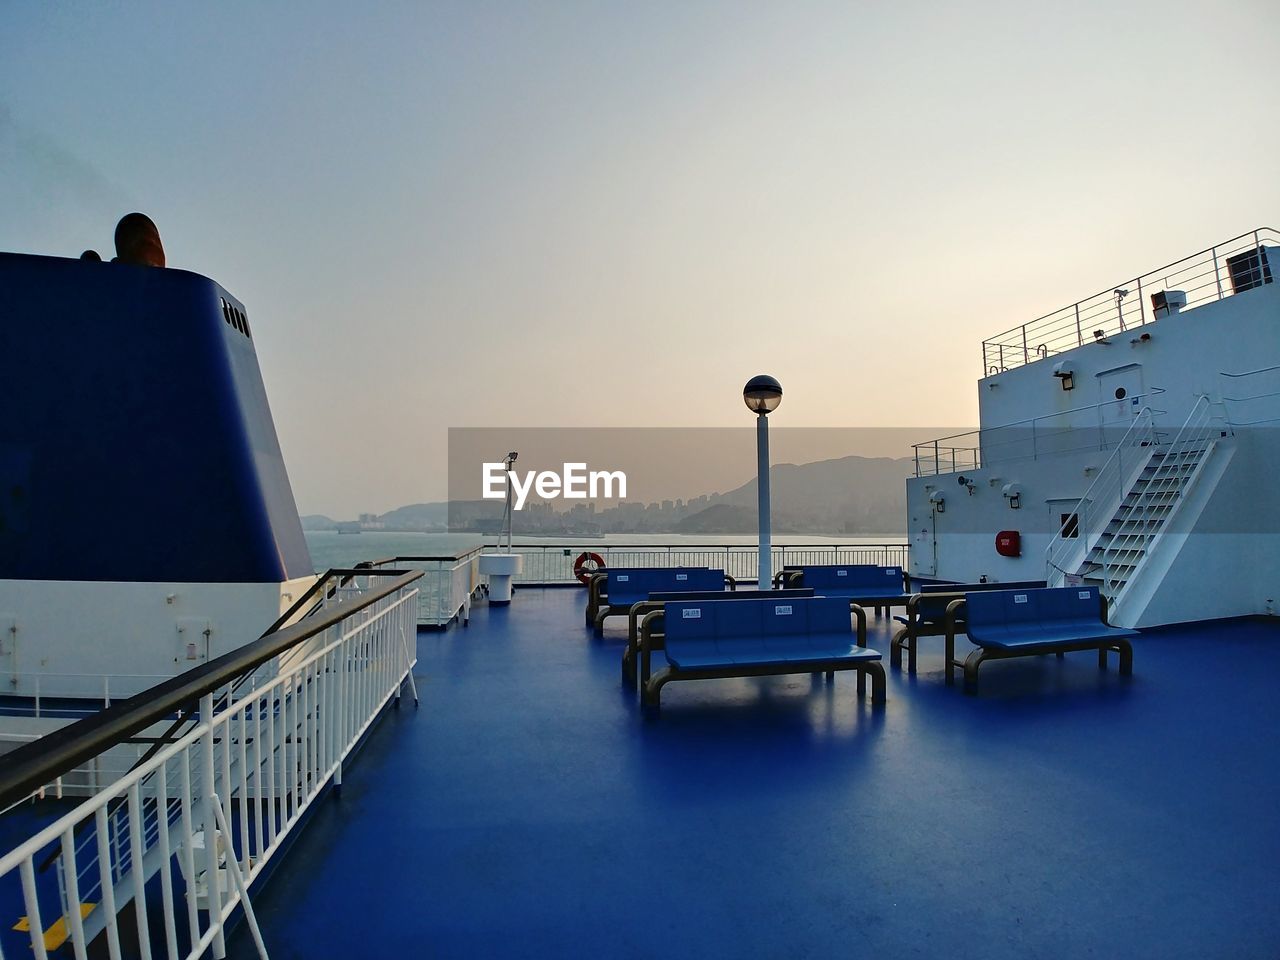 Evening light on an empty ferry deck on its way to busan